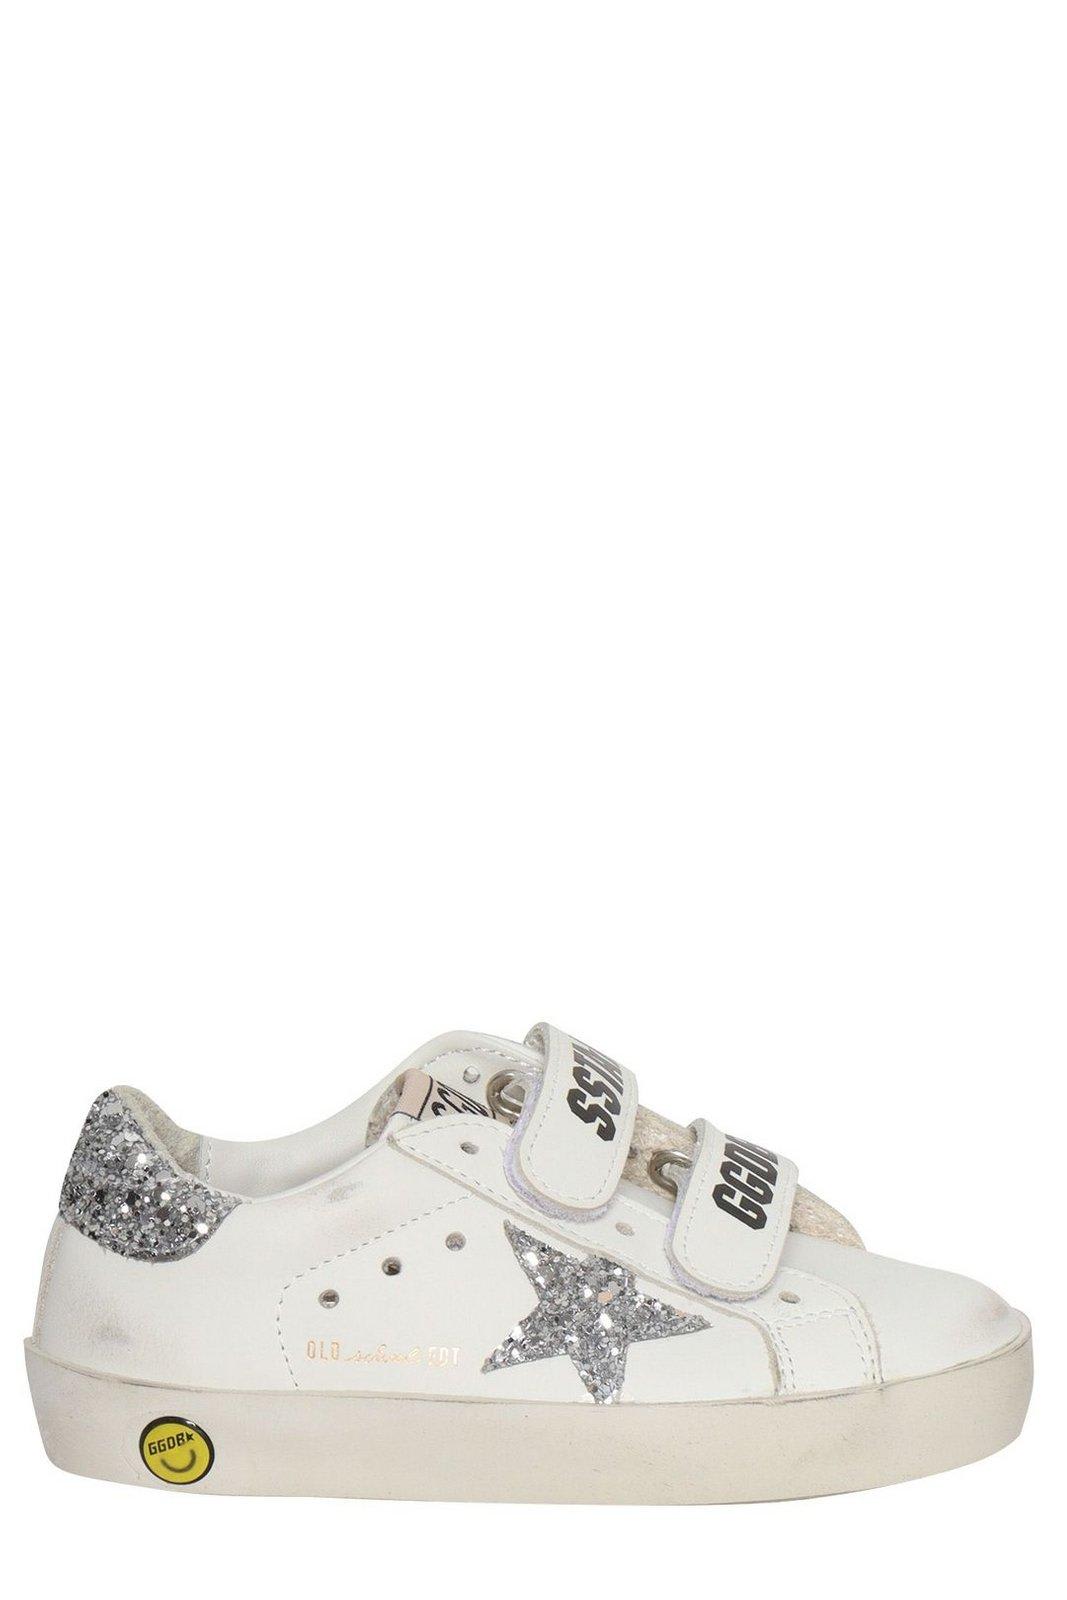 Shop Golden Goose Old School Star Patch Sneakers In White/ice/silver